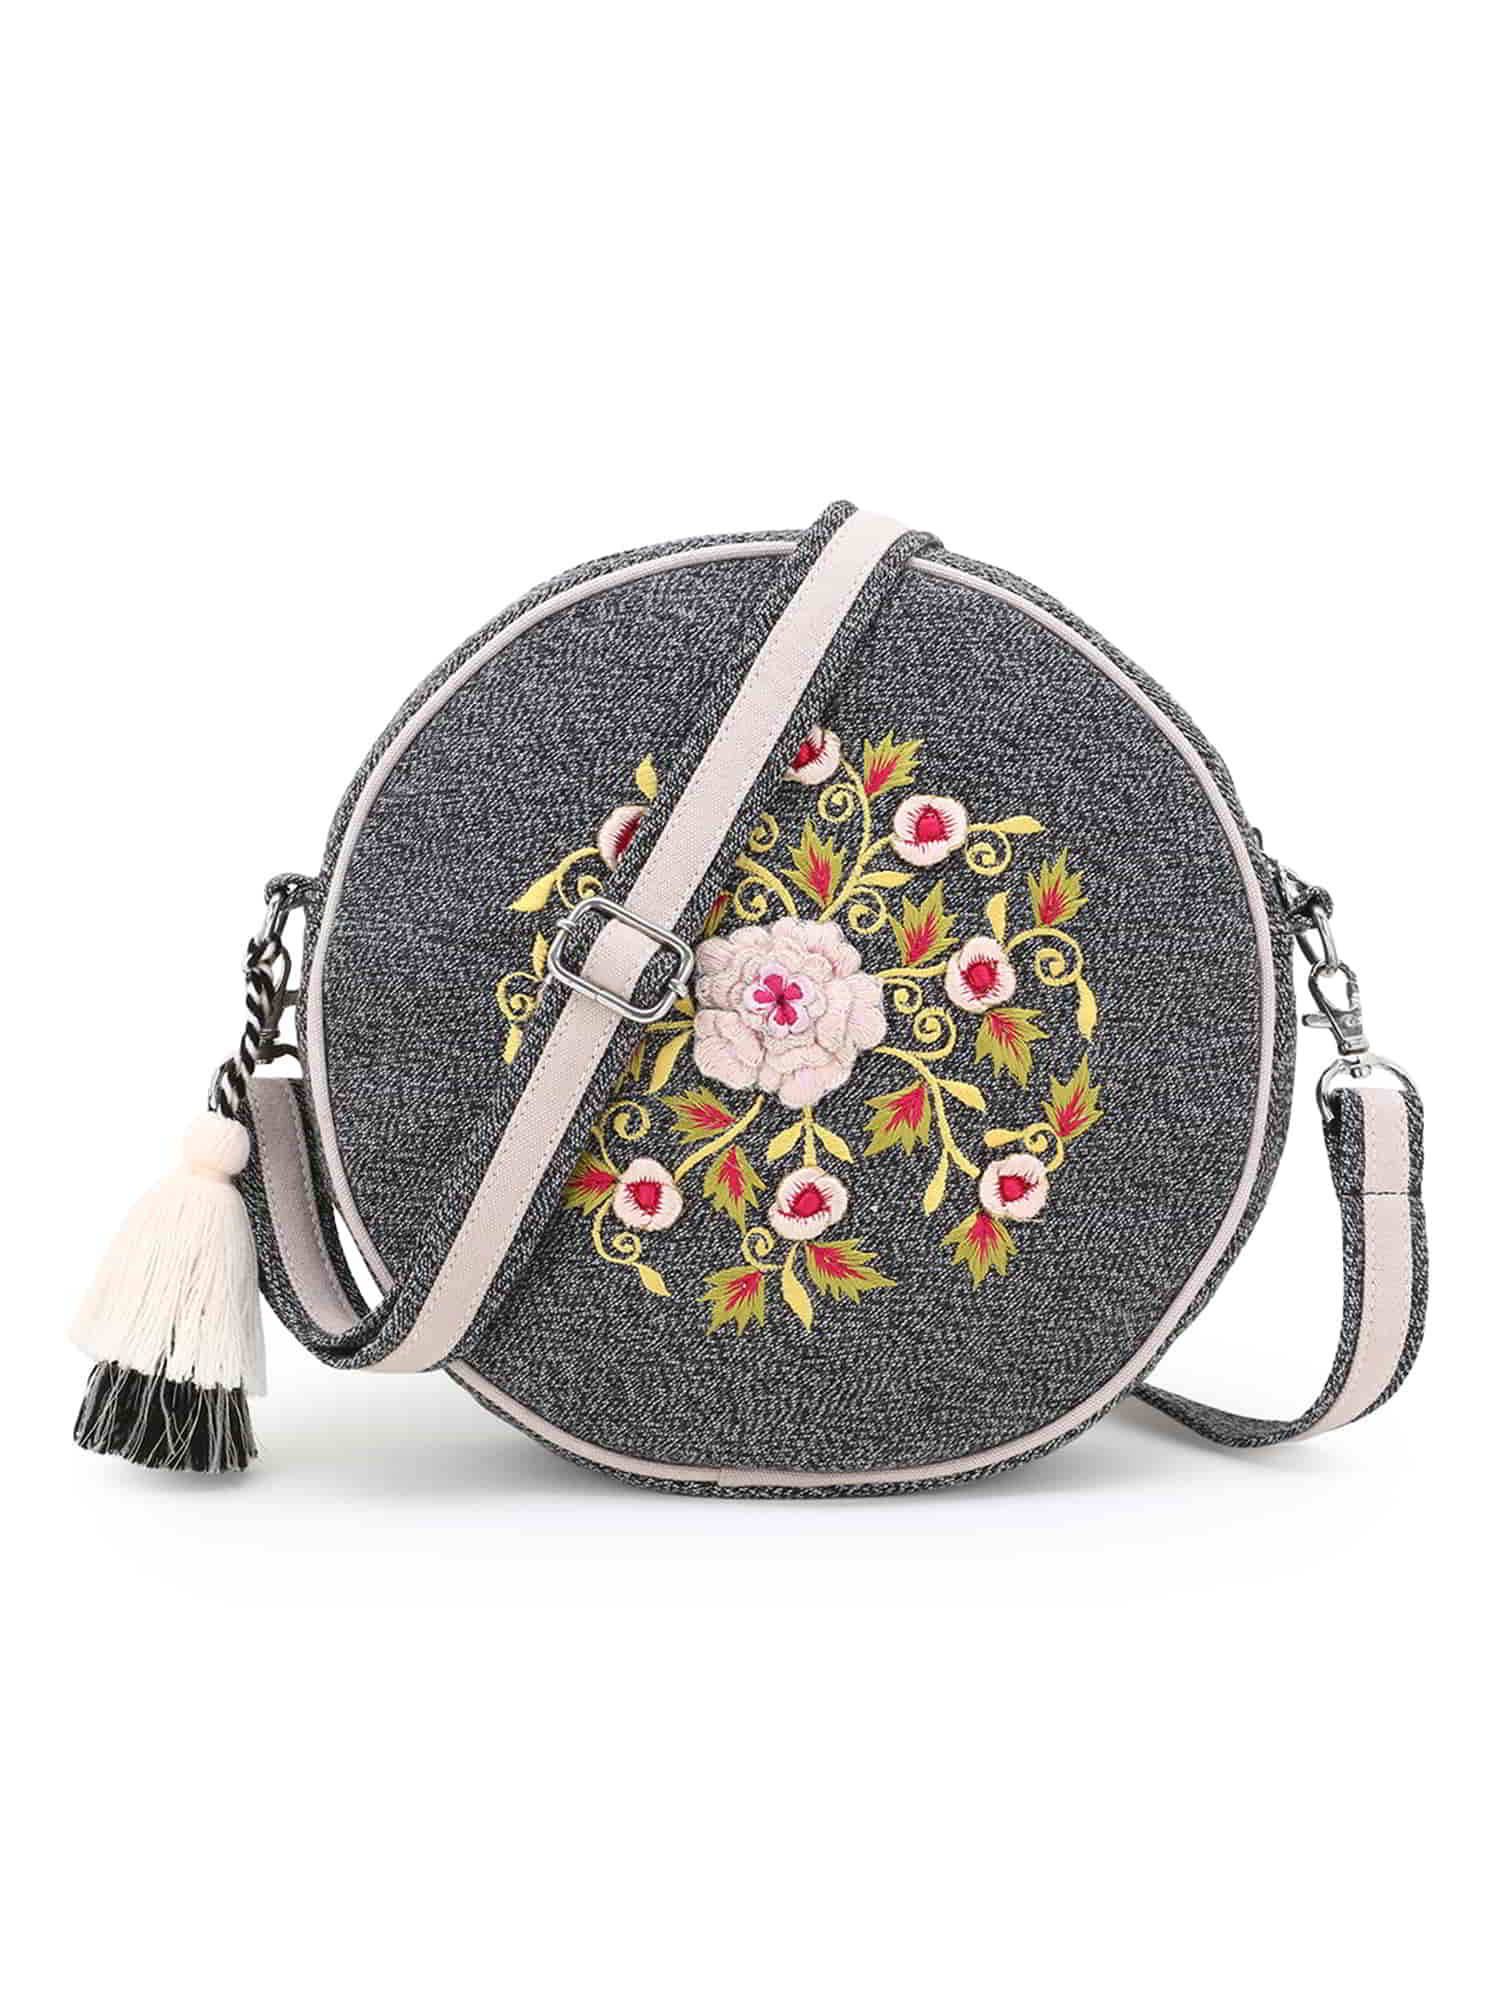 Anekaant Glary White Multicolored Cotton Sling Bag